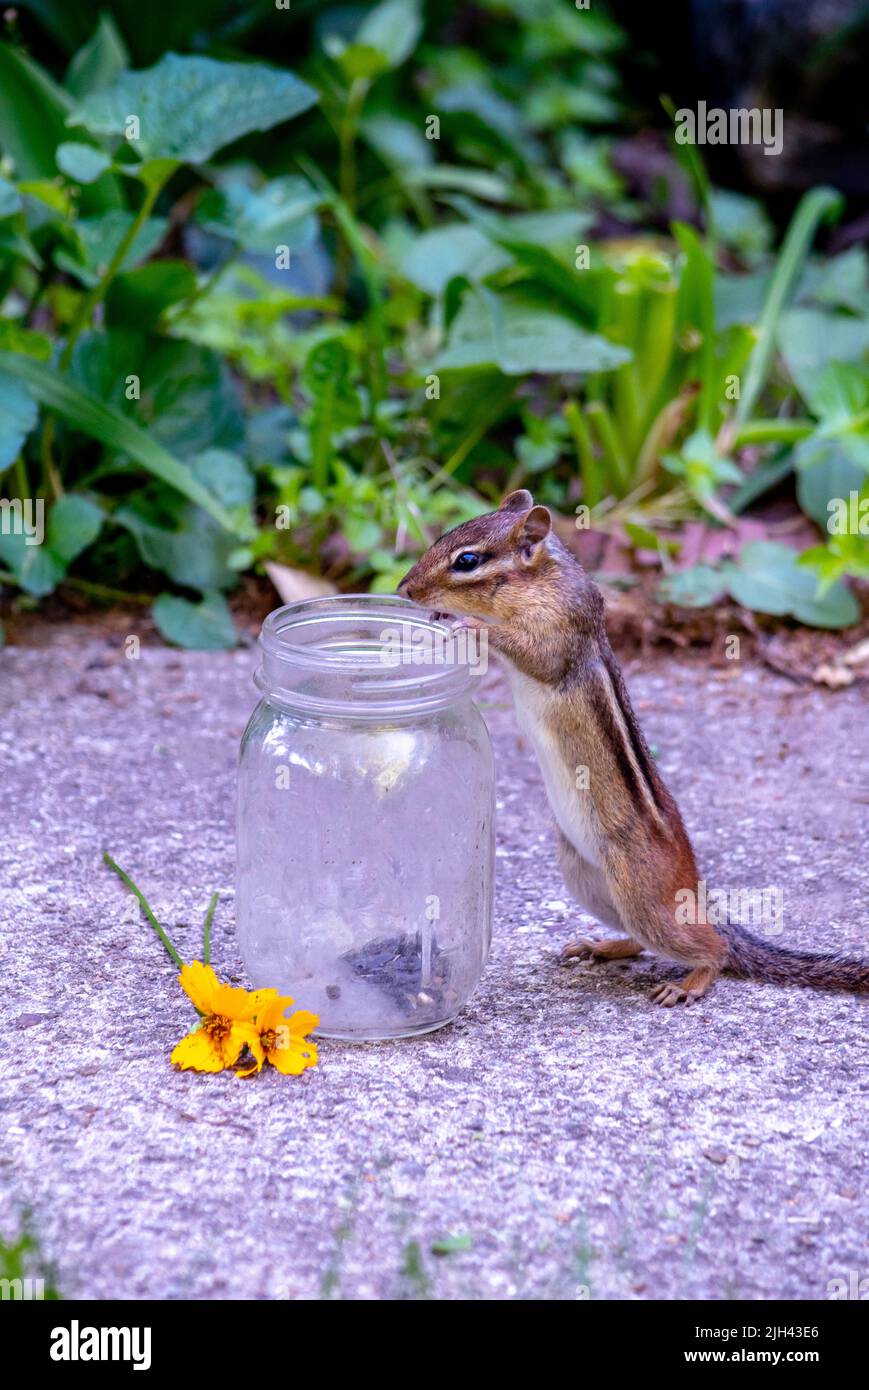 Small chipmunk sees delicious sunflower seeds in the bottom of a glass jar, but now hoe to get to them? Stock Photo